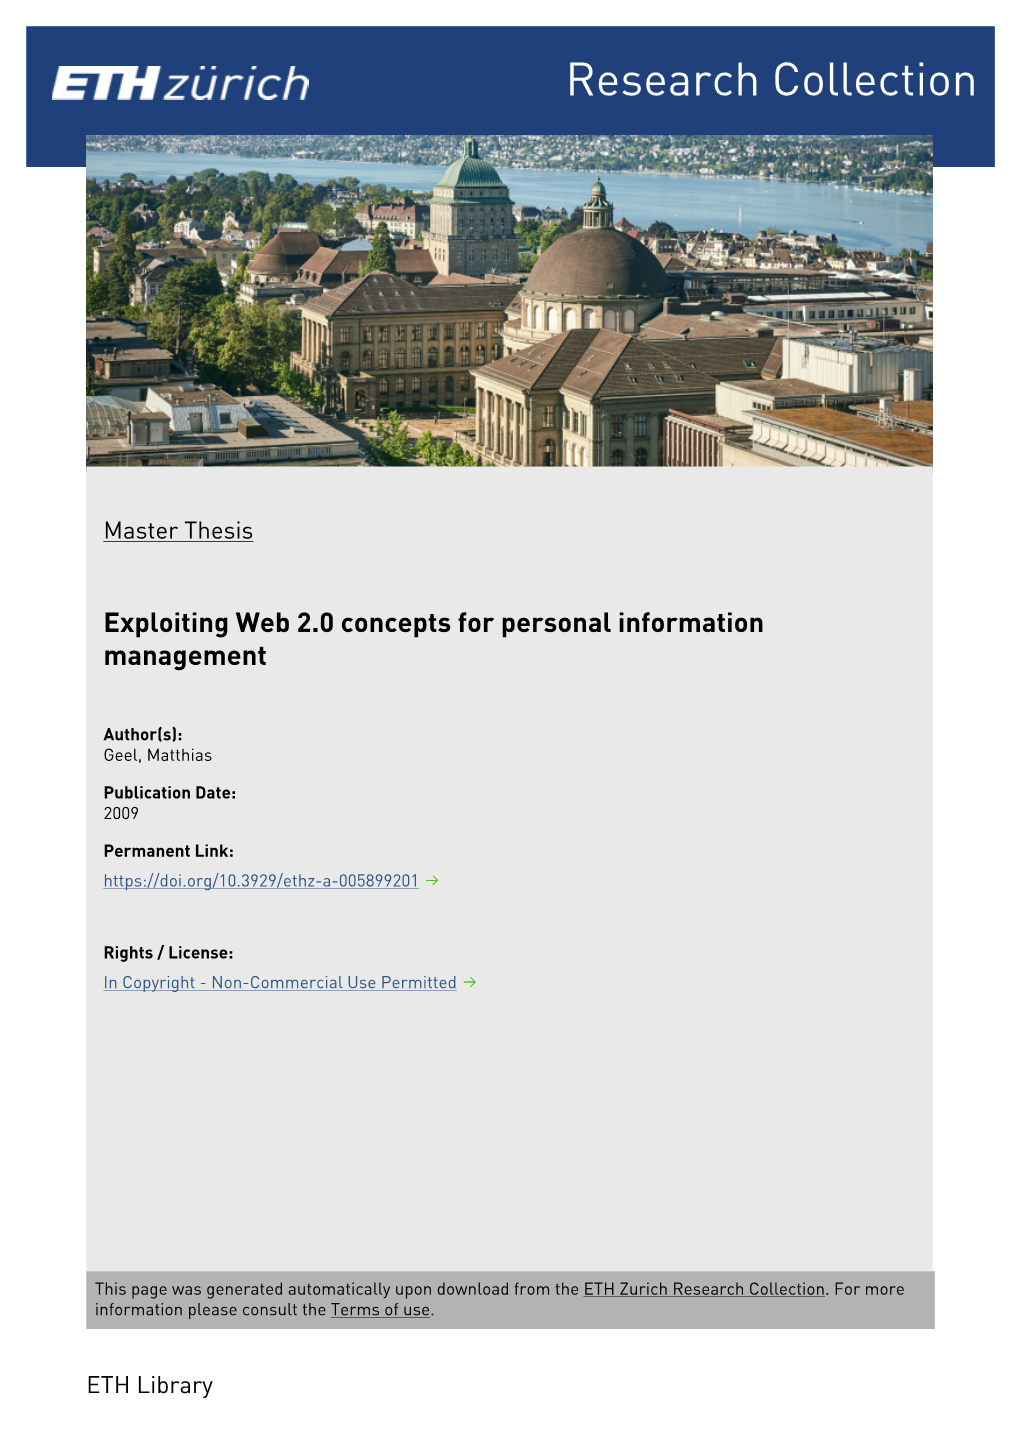 Exploiting Web 2.0 Concepts for Personal Information Management